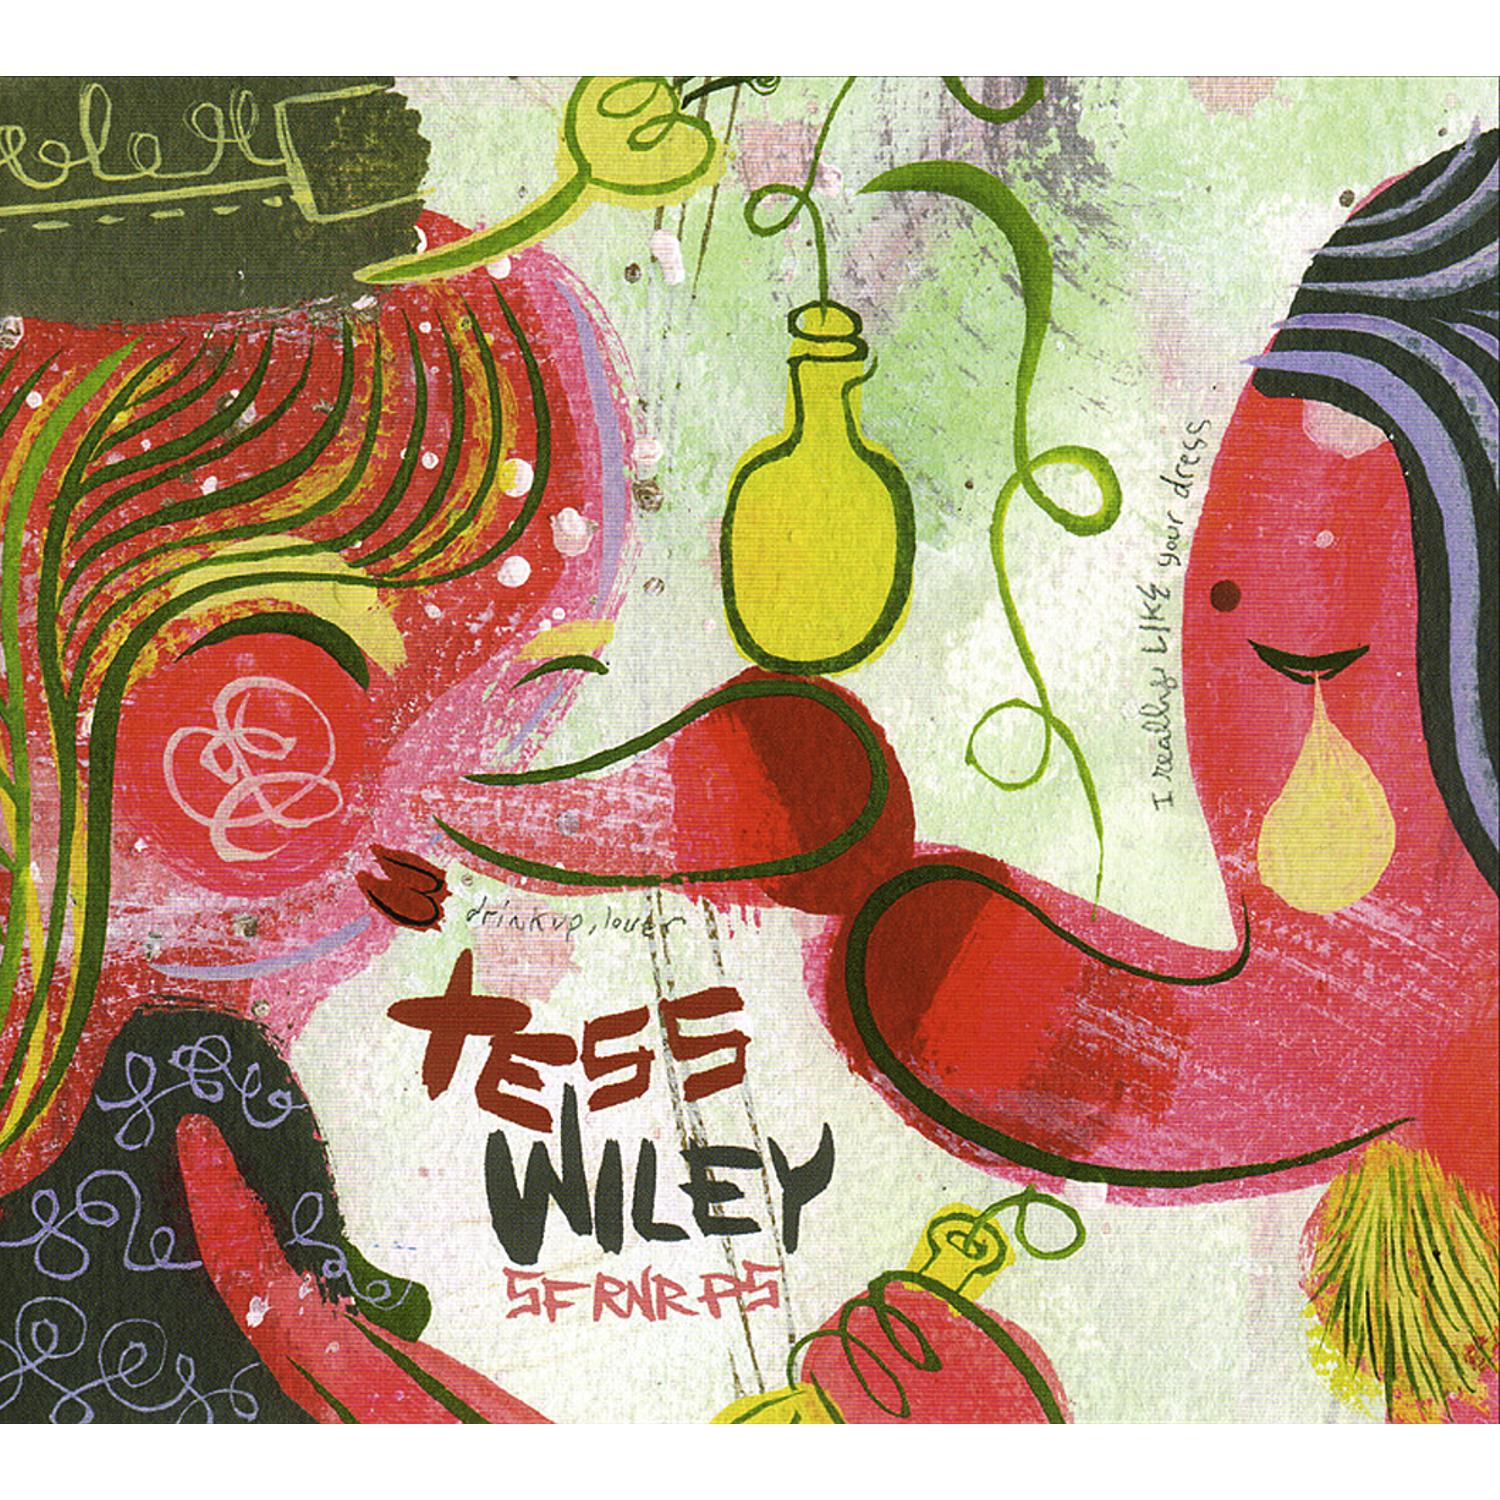 Tess Wiley Superfast - (CD) Slow Rock\'n\'roll - Played